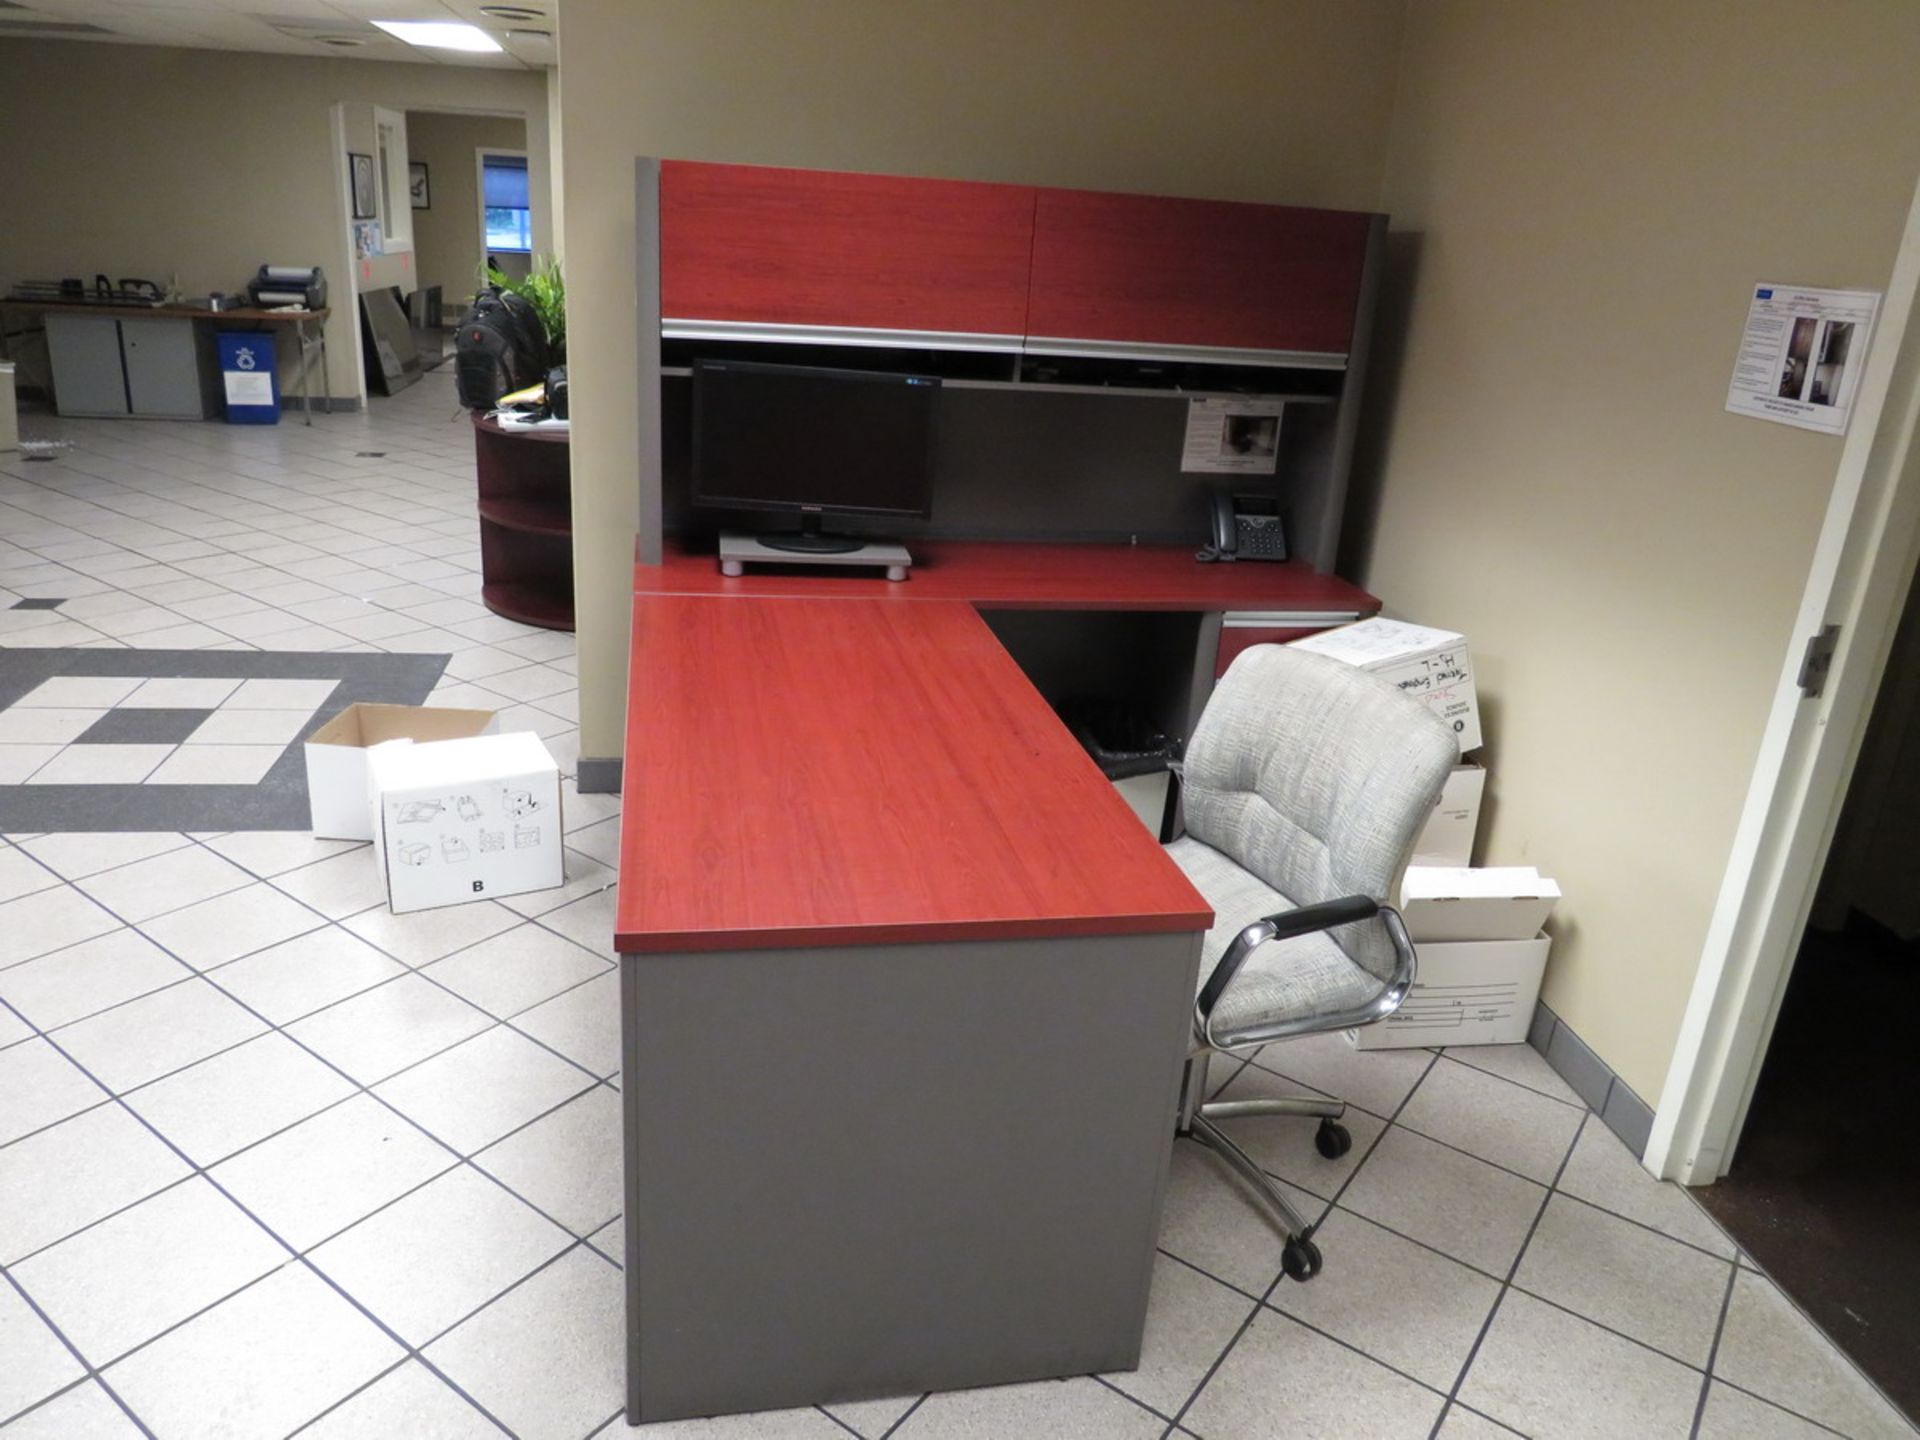 Contents of Area to Include: L-Shaped Desk, Chair (Plant #1)